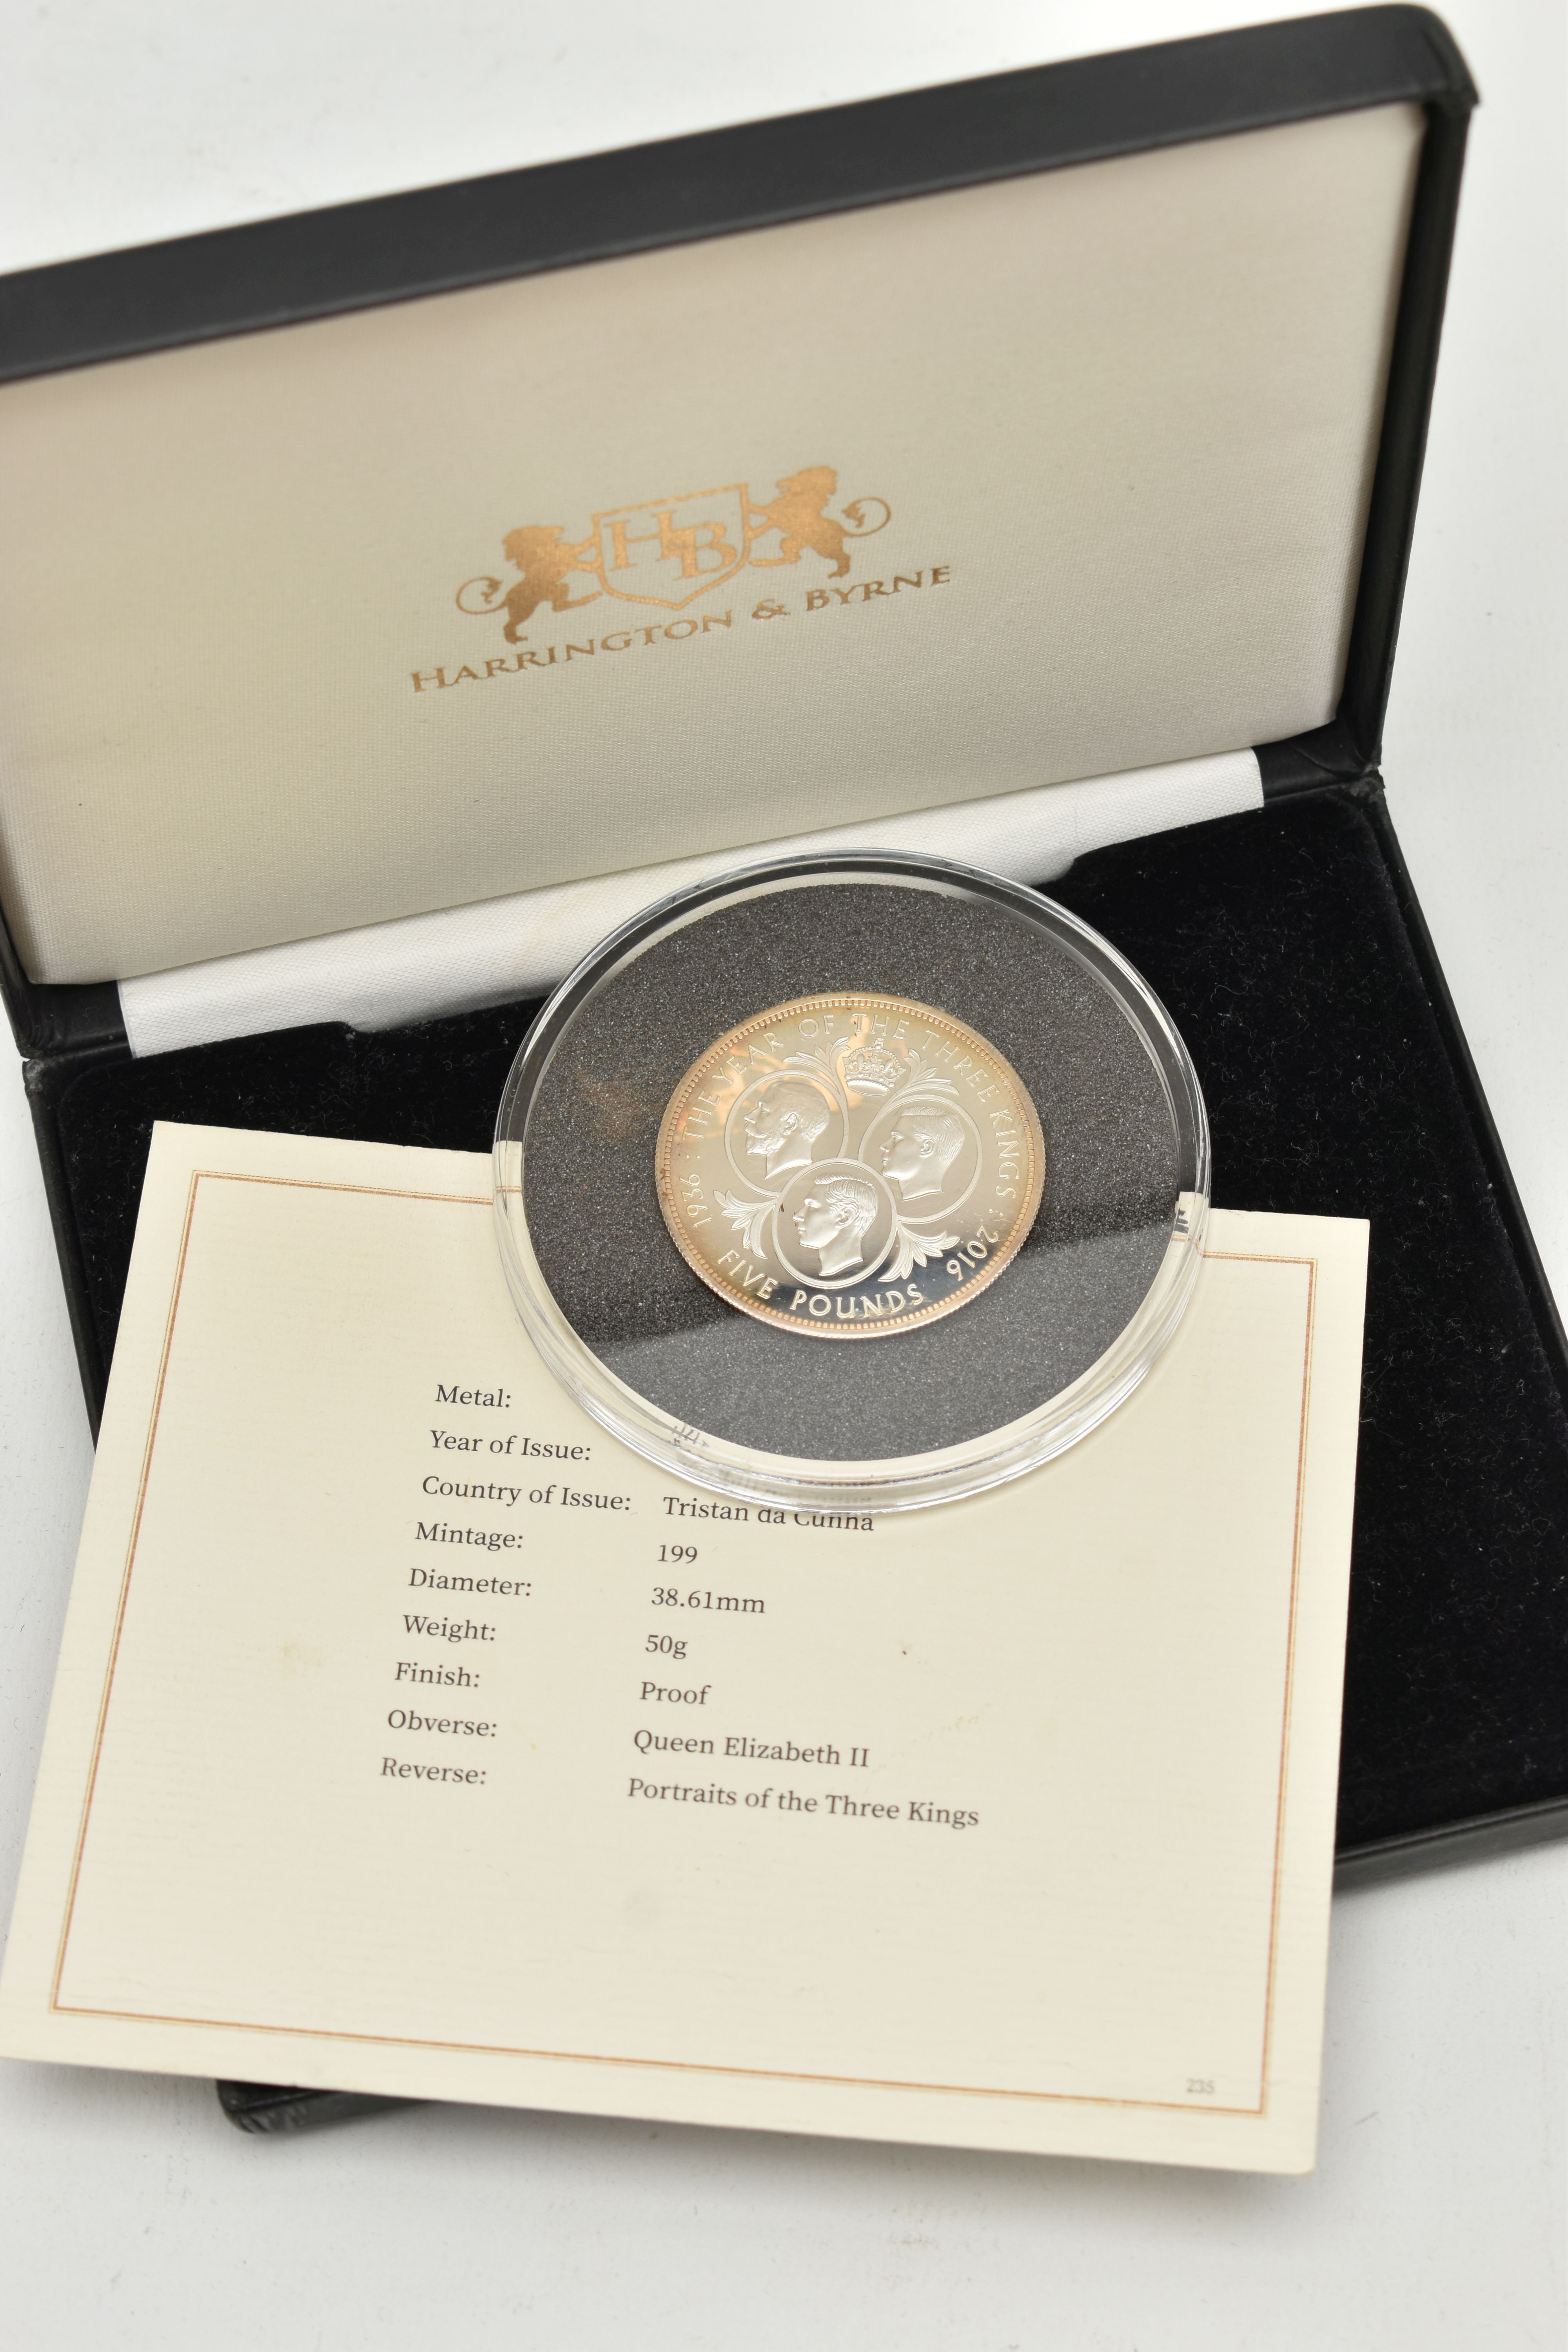 A CASED '2016 YEAR OF THE THREE KINGS £5 SILVER PIEDFORT COIN', 925/1000 silver, Tristan da Cunha, - Image 3 of 3